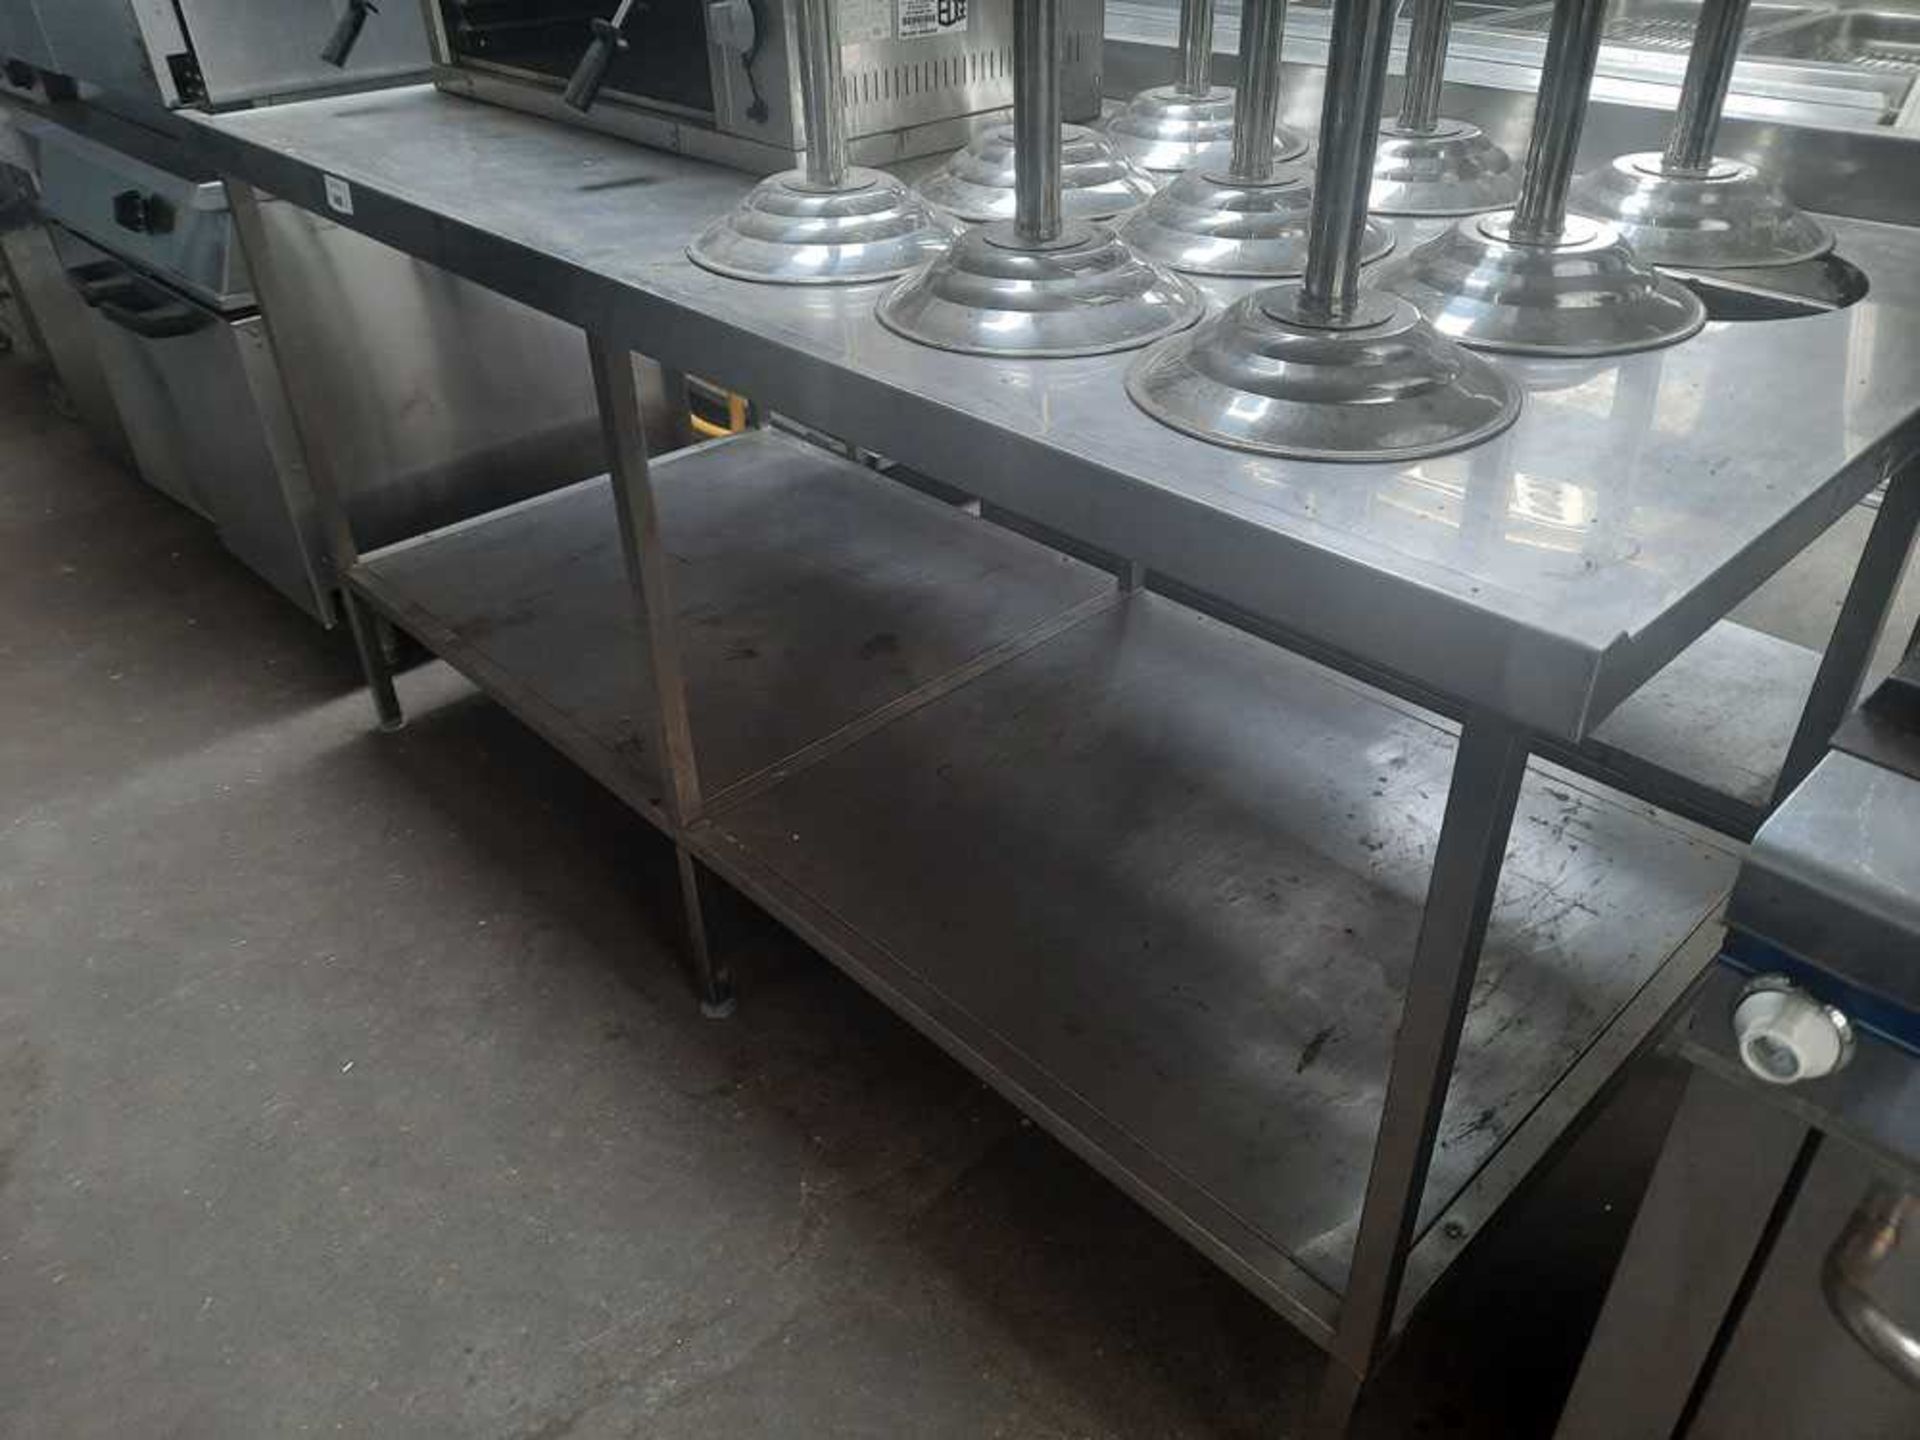 +VAT 200cm stainless steel preparation table with a hole cut out for waste disposal and shelf - Image 2 of 2